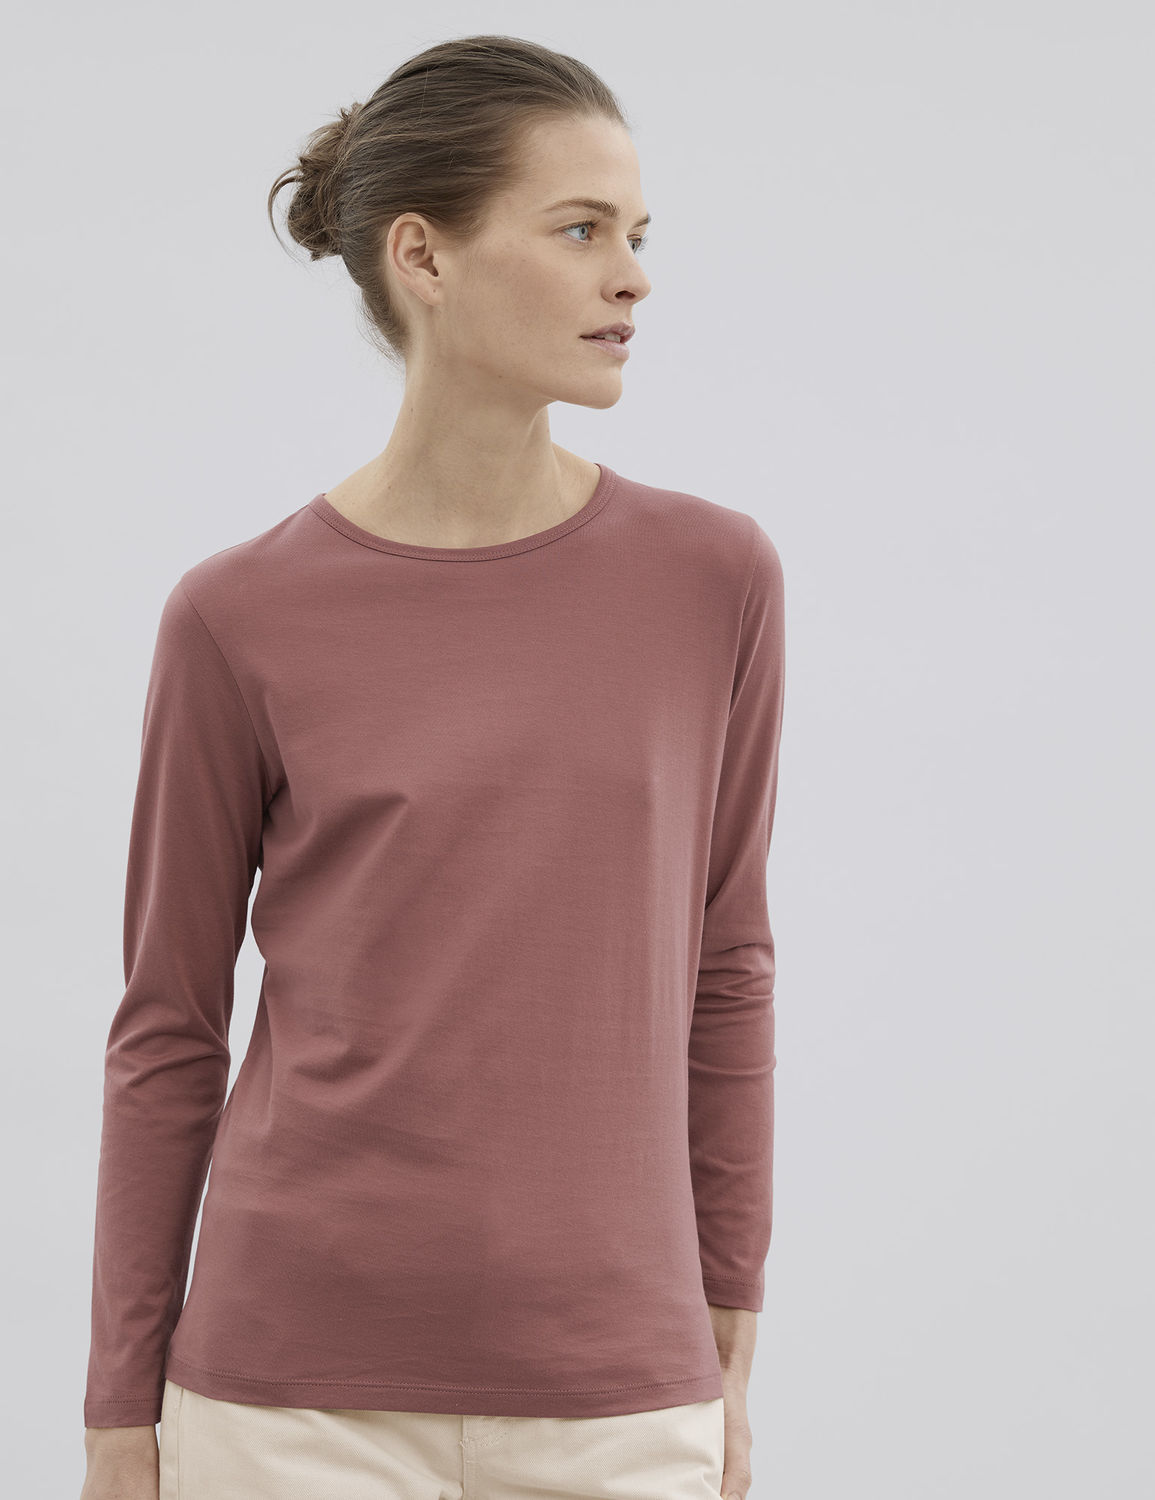 women's long sleeved t-shirt in pink